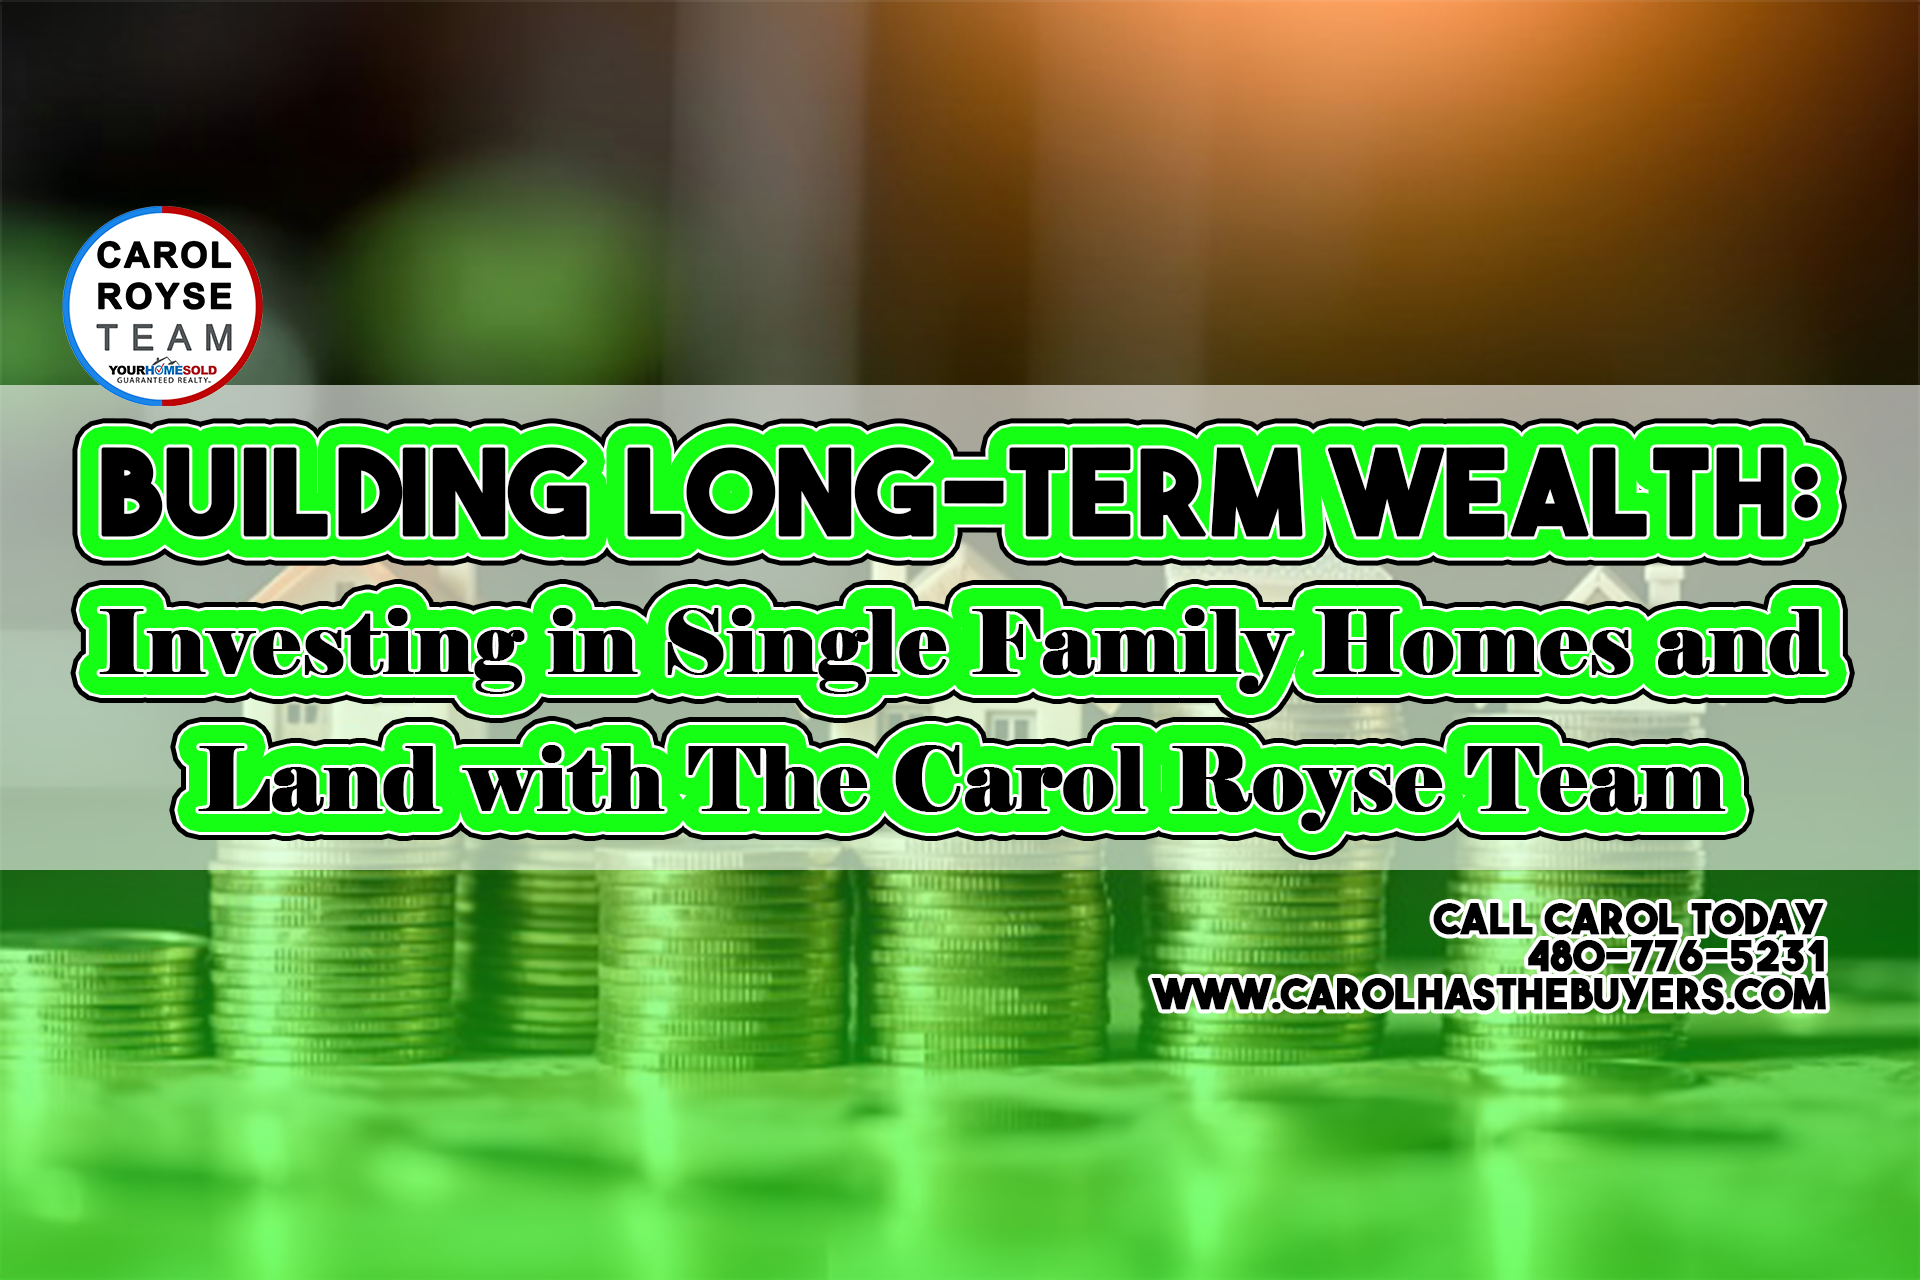 Building Long-Term Wealth: Investing in Single Family Homes and Land with The Carol Royse Team